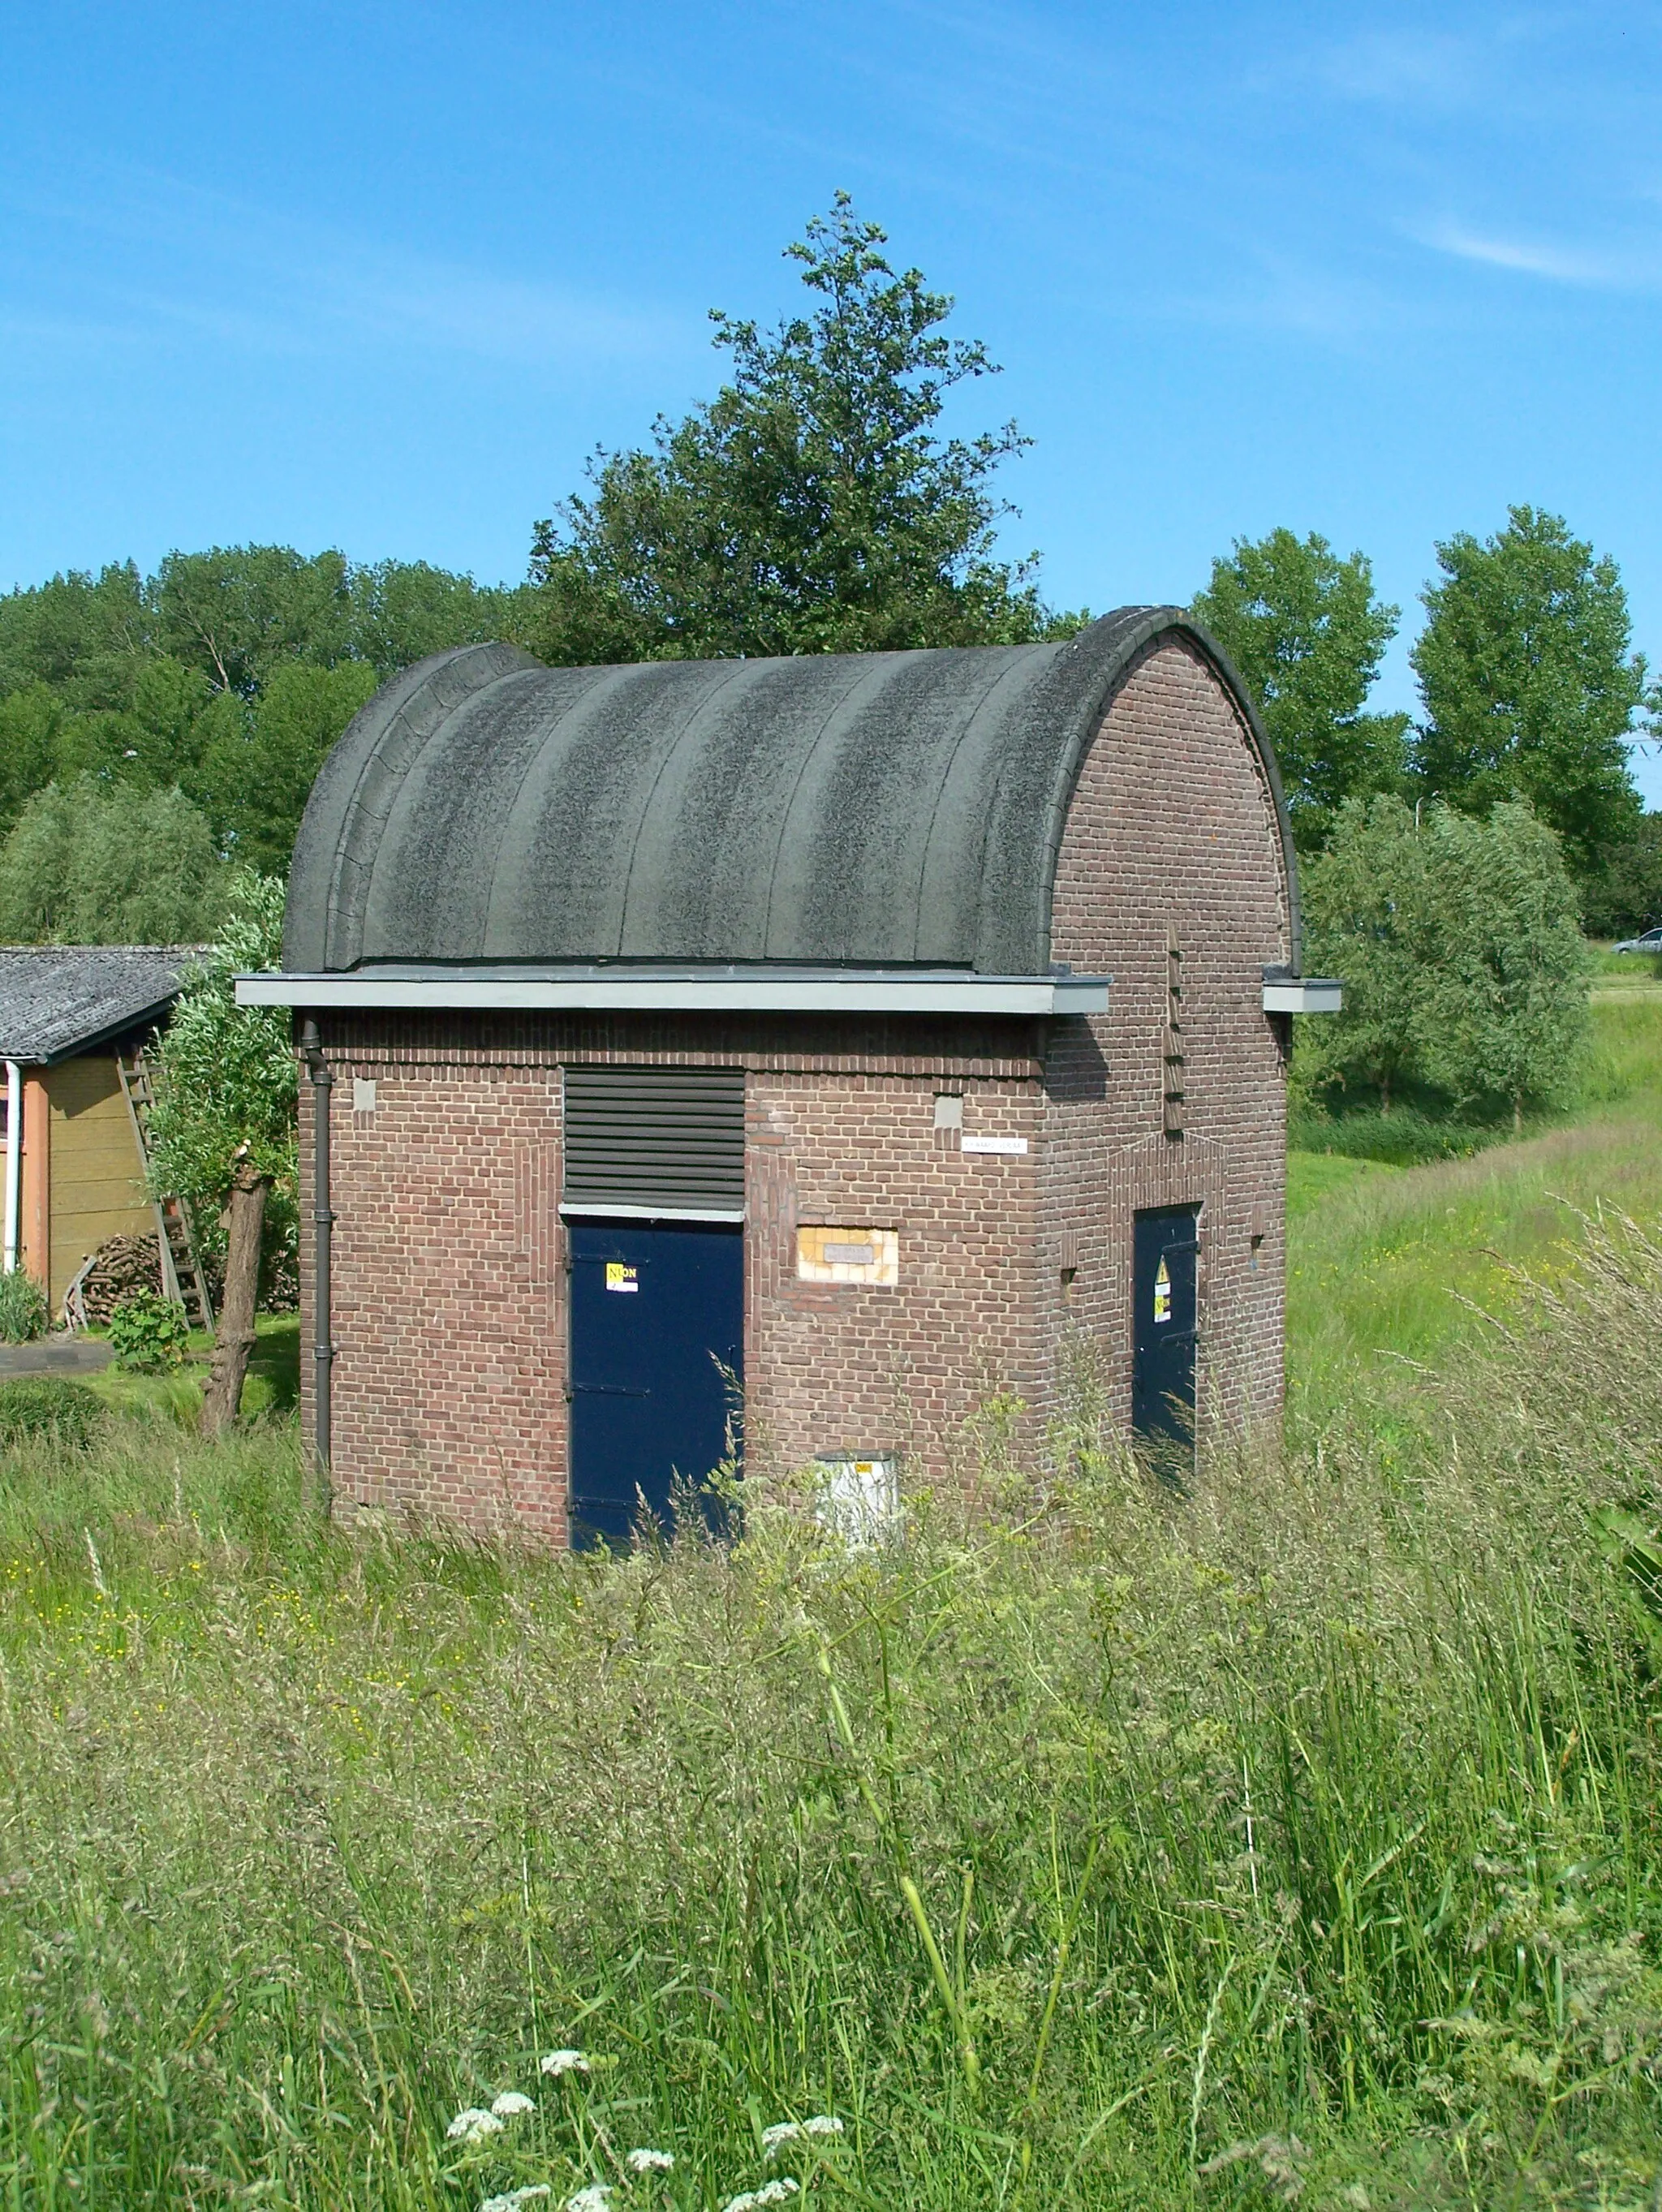 Photo showing: Distribution substation at the Verlaat in Heerhugowaard. Build around 1930 for the former P.E.N.